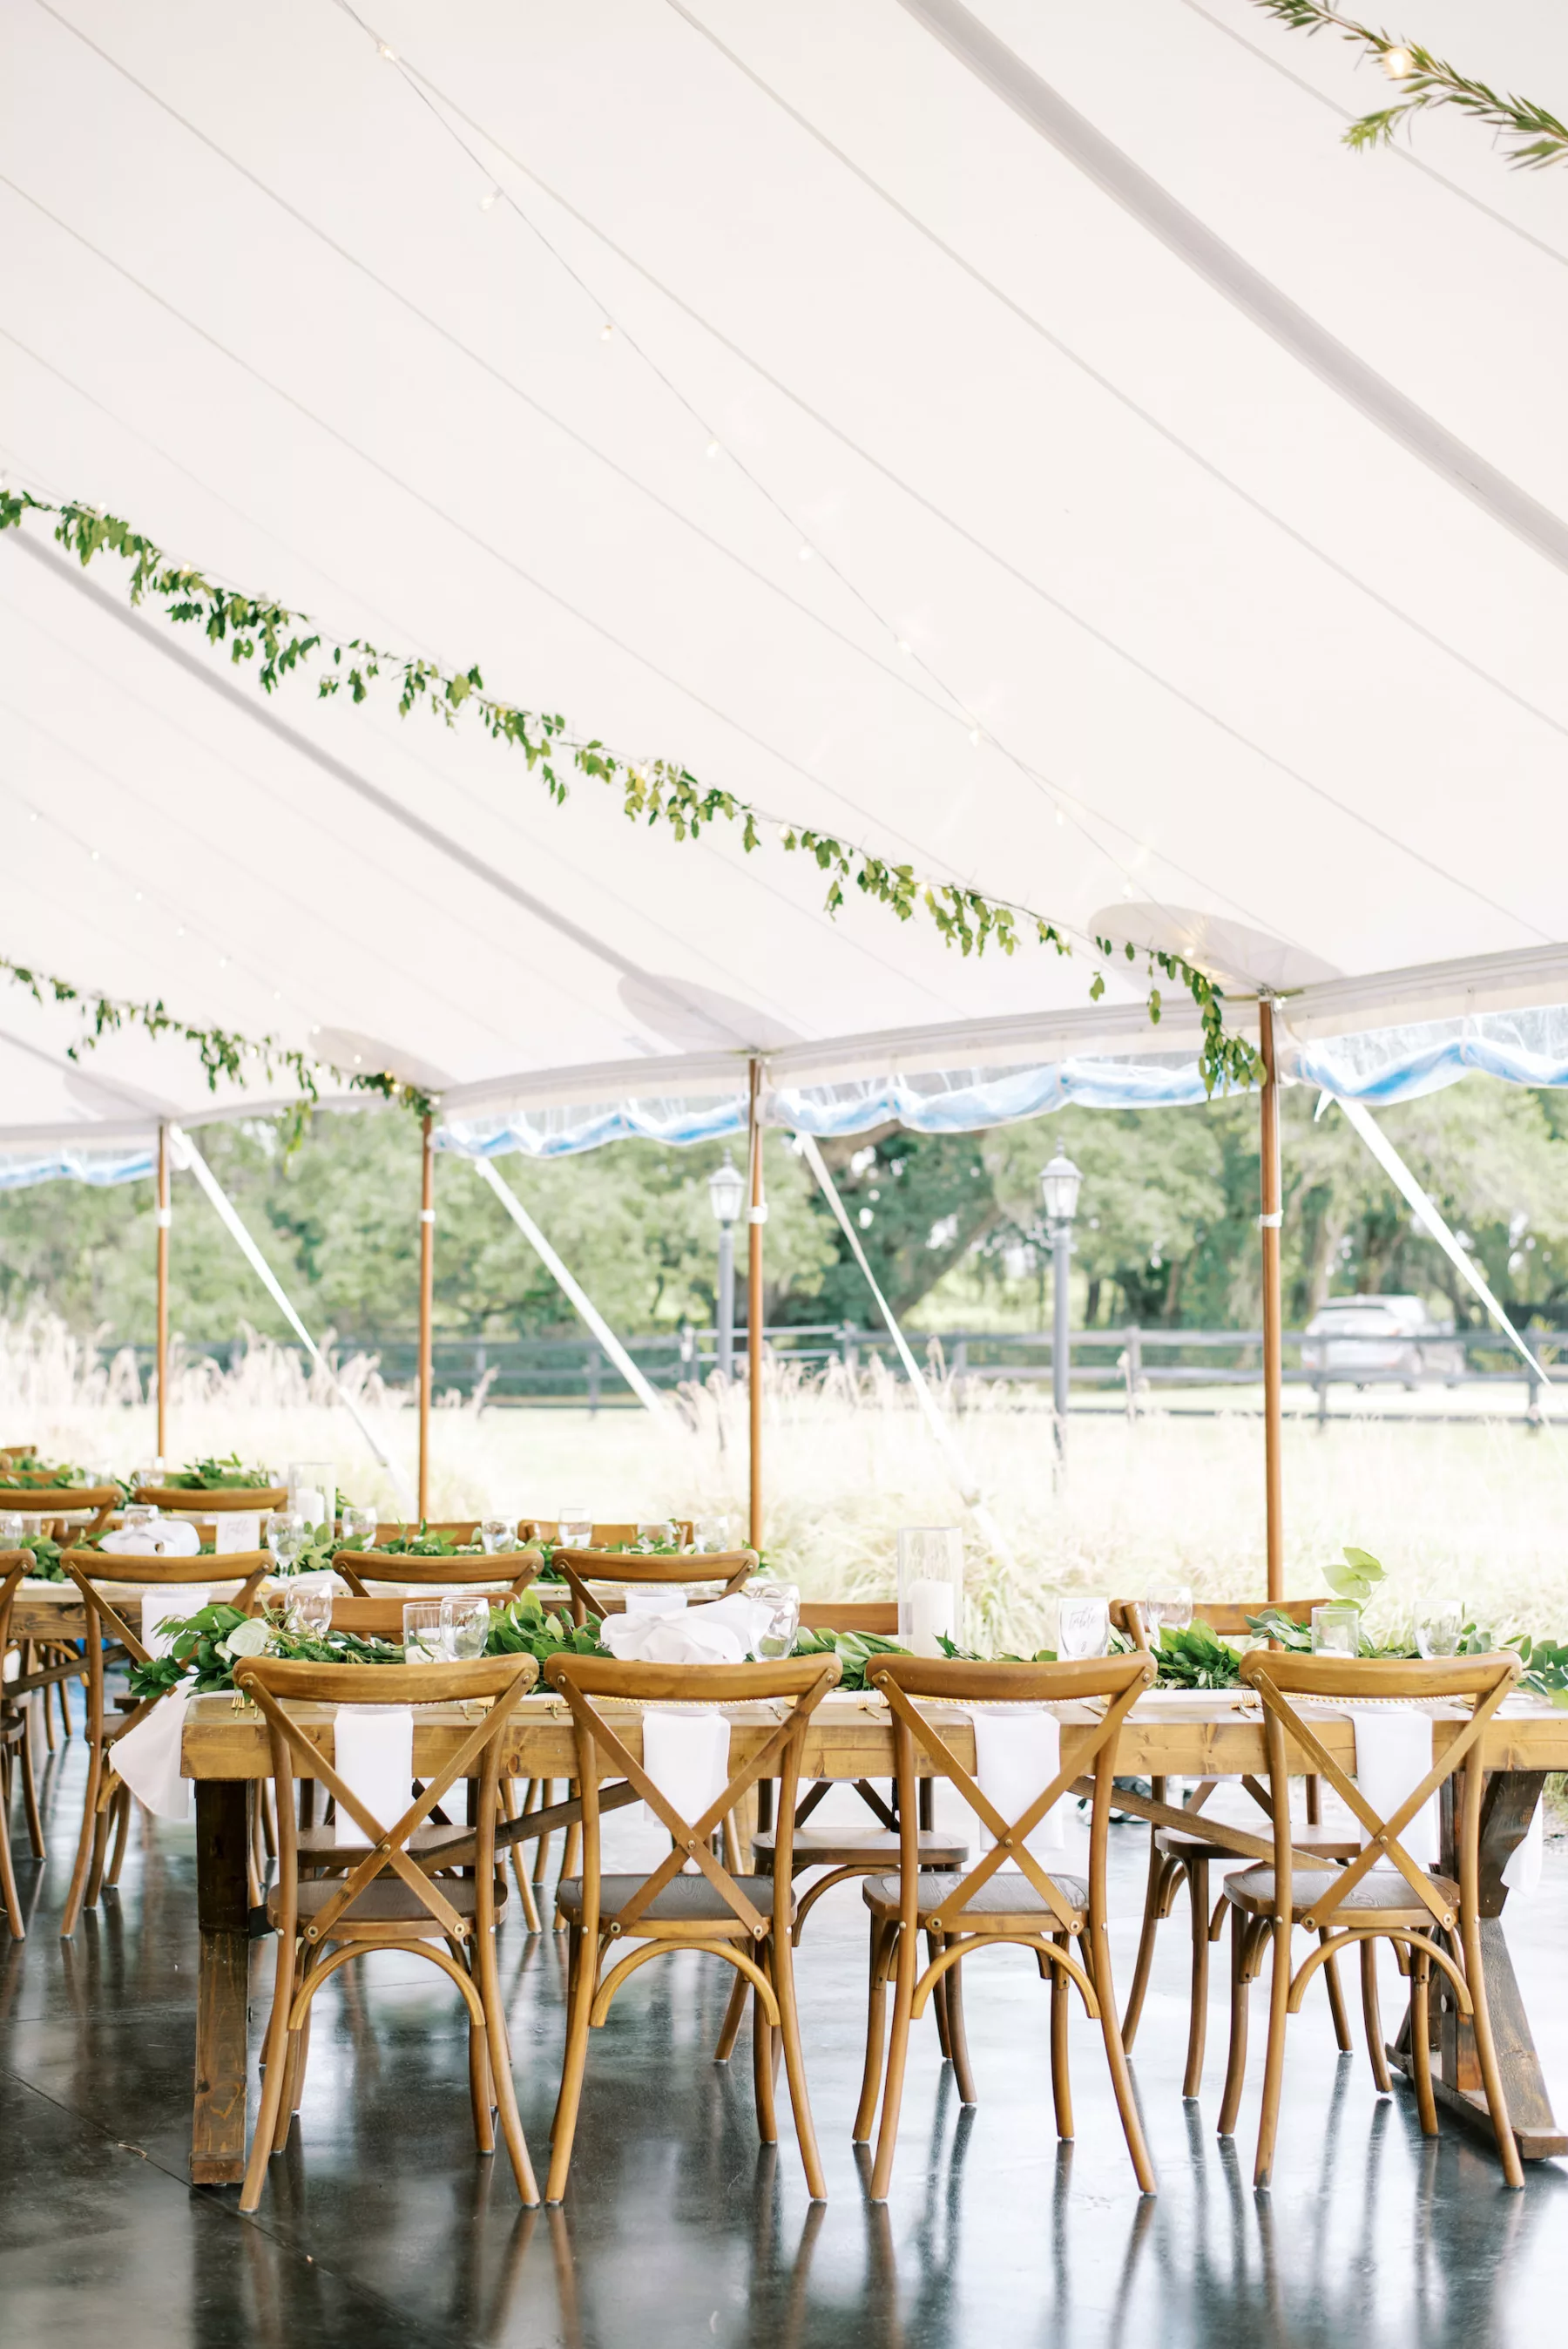 Whimsical Green and White Wedding Reception Inspiration | Rustic Wooden Tables with Crossback Chairs Ideas | Outdoor Tampa Venue Mill Pond Estate